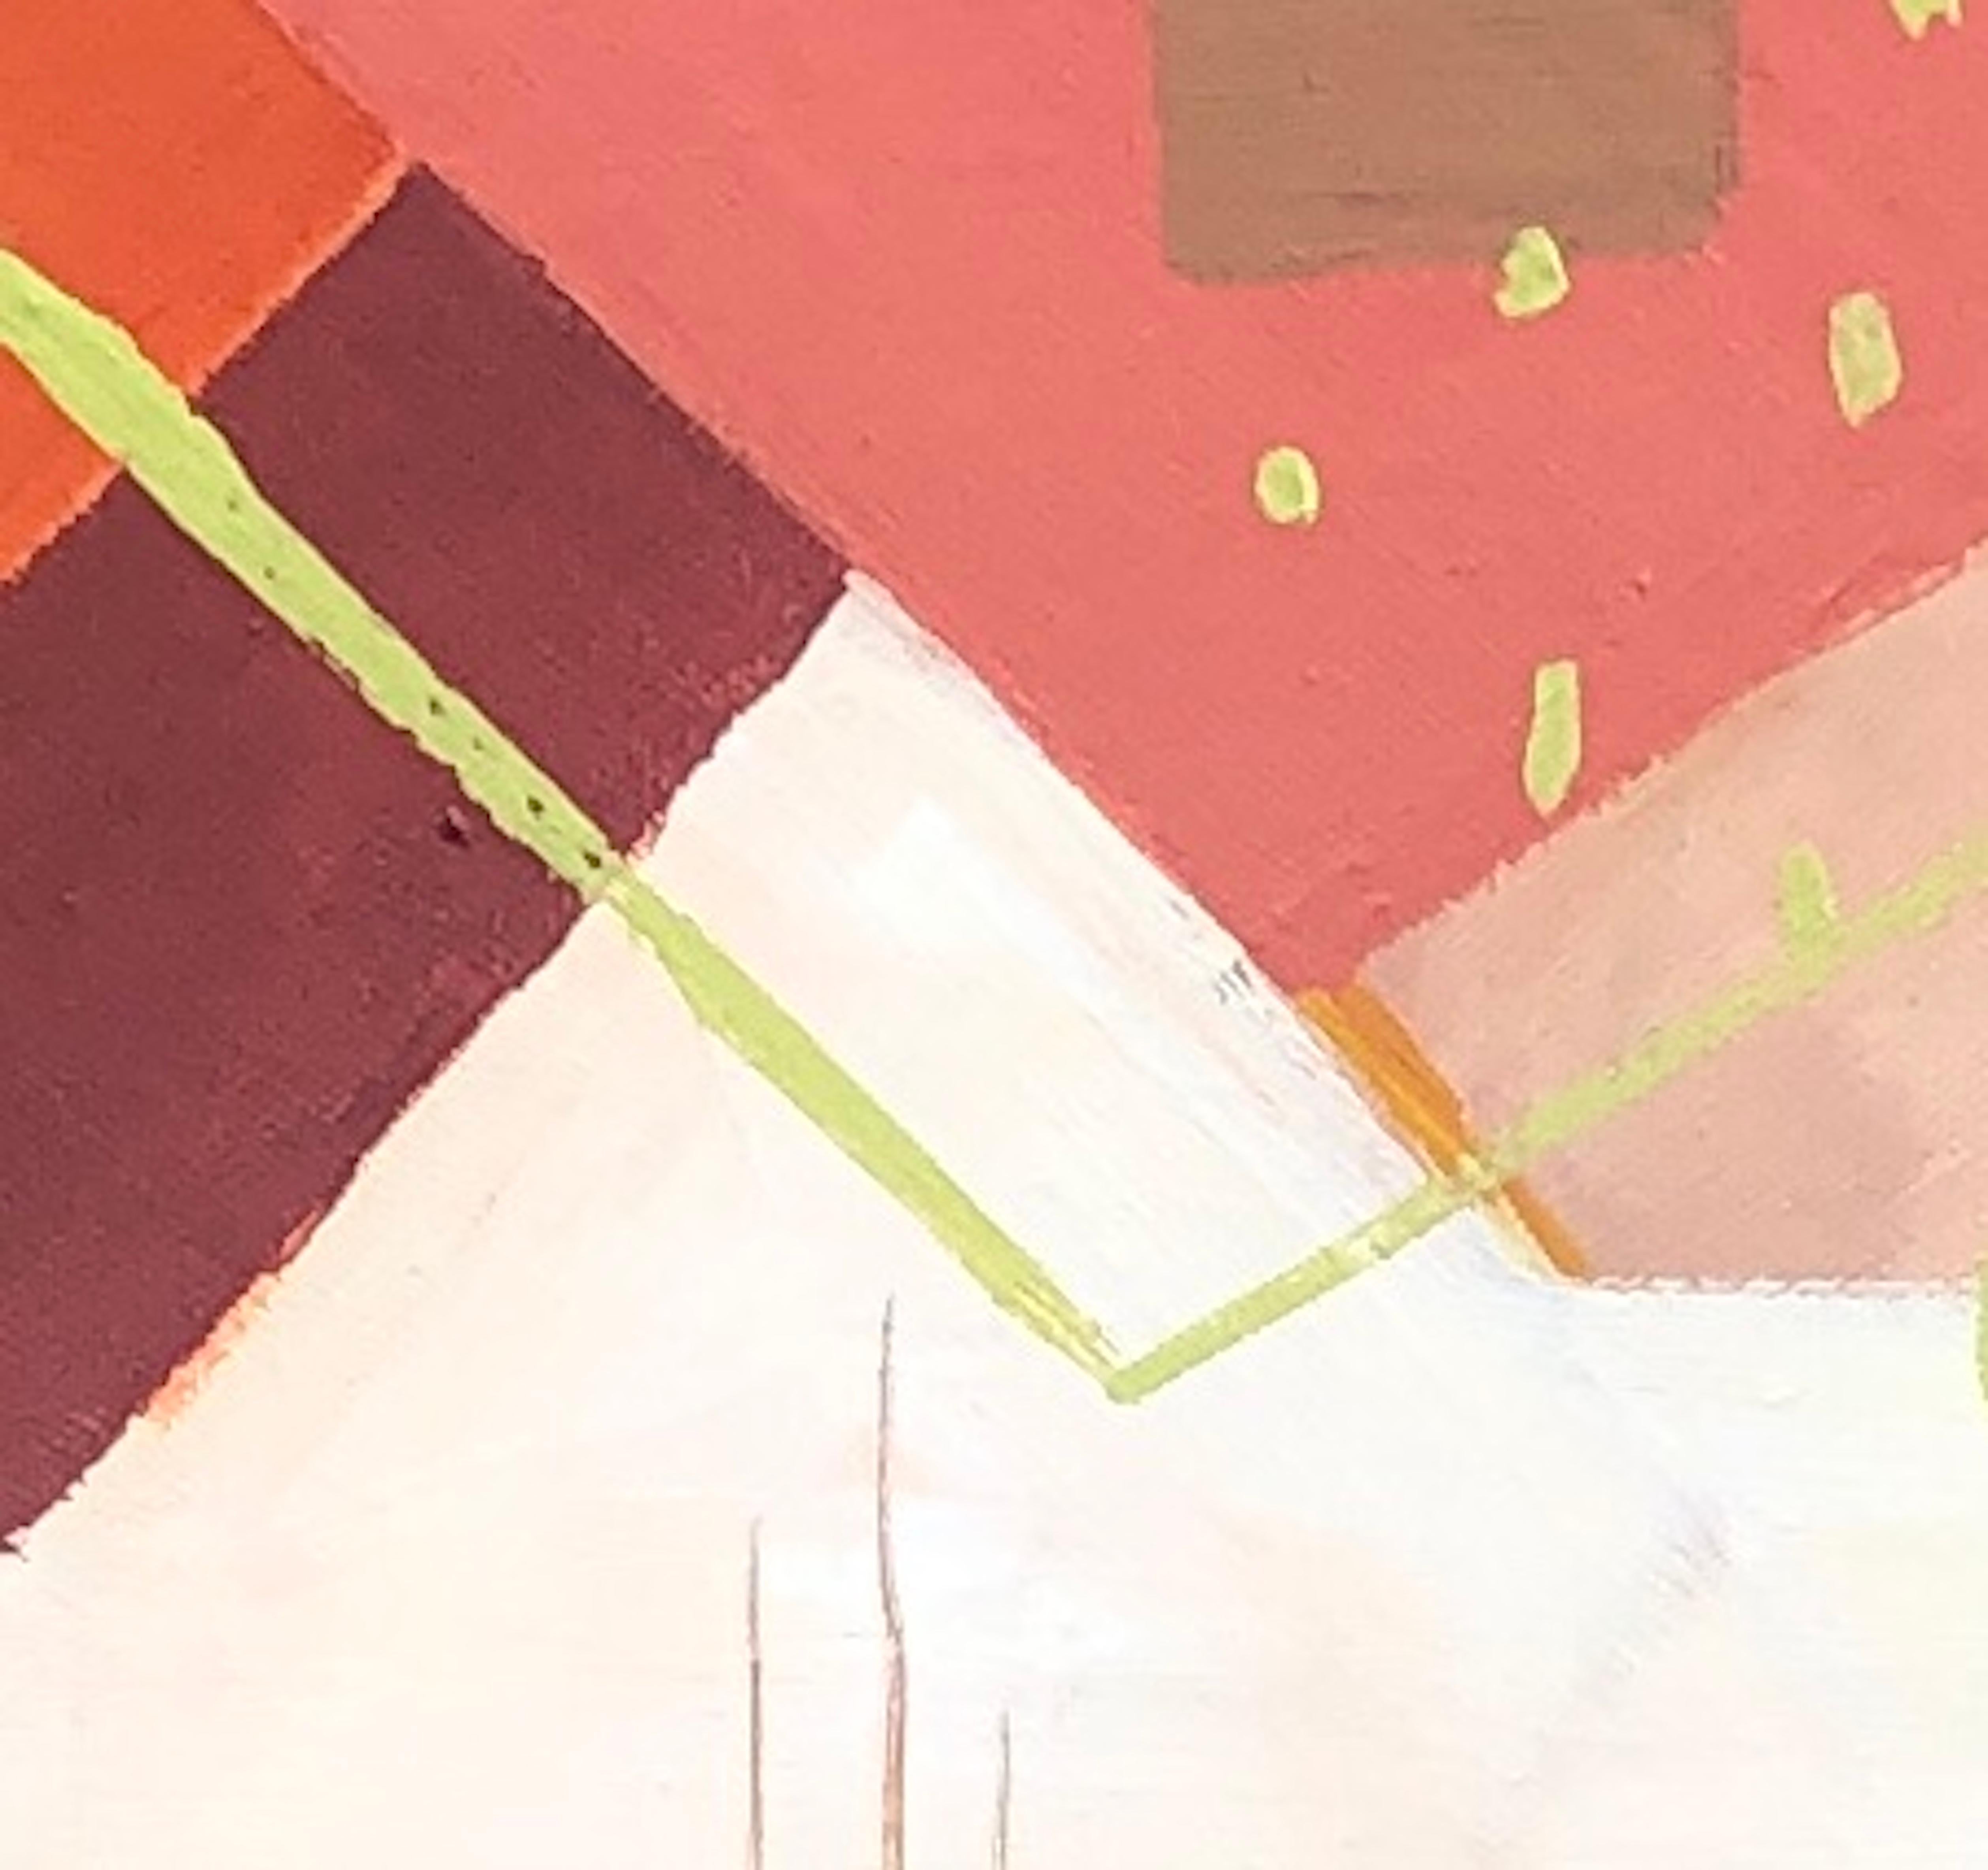 Bryggen Facades 6 by Maggie LaPorte-Banks, Original painting, Abstract Art, Pink - Orange Abstract Painting by Maggie LaPorte Banks